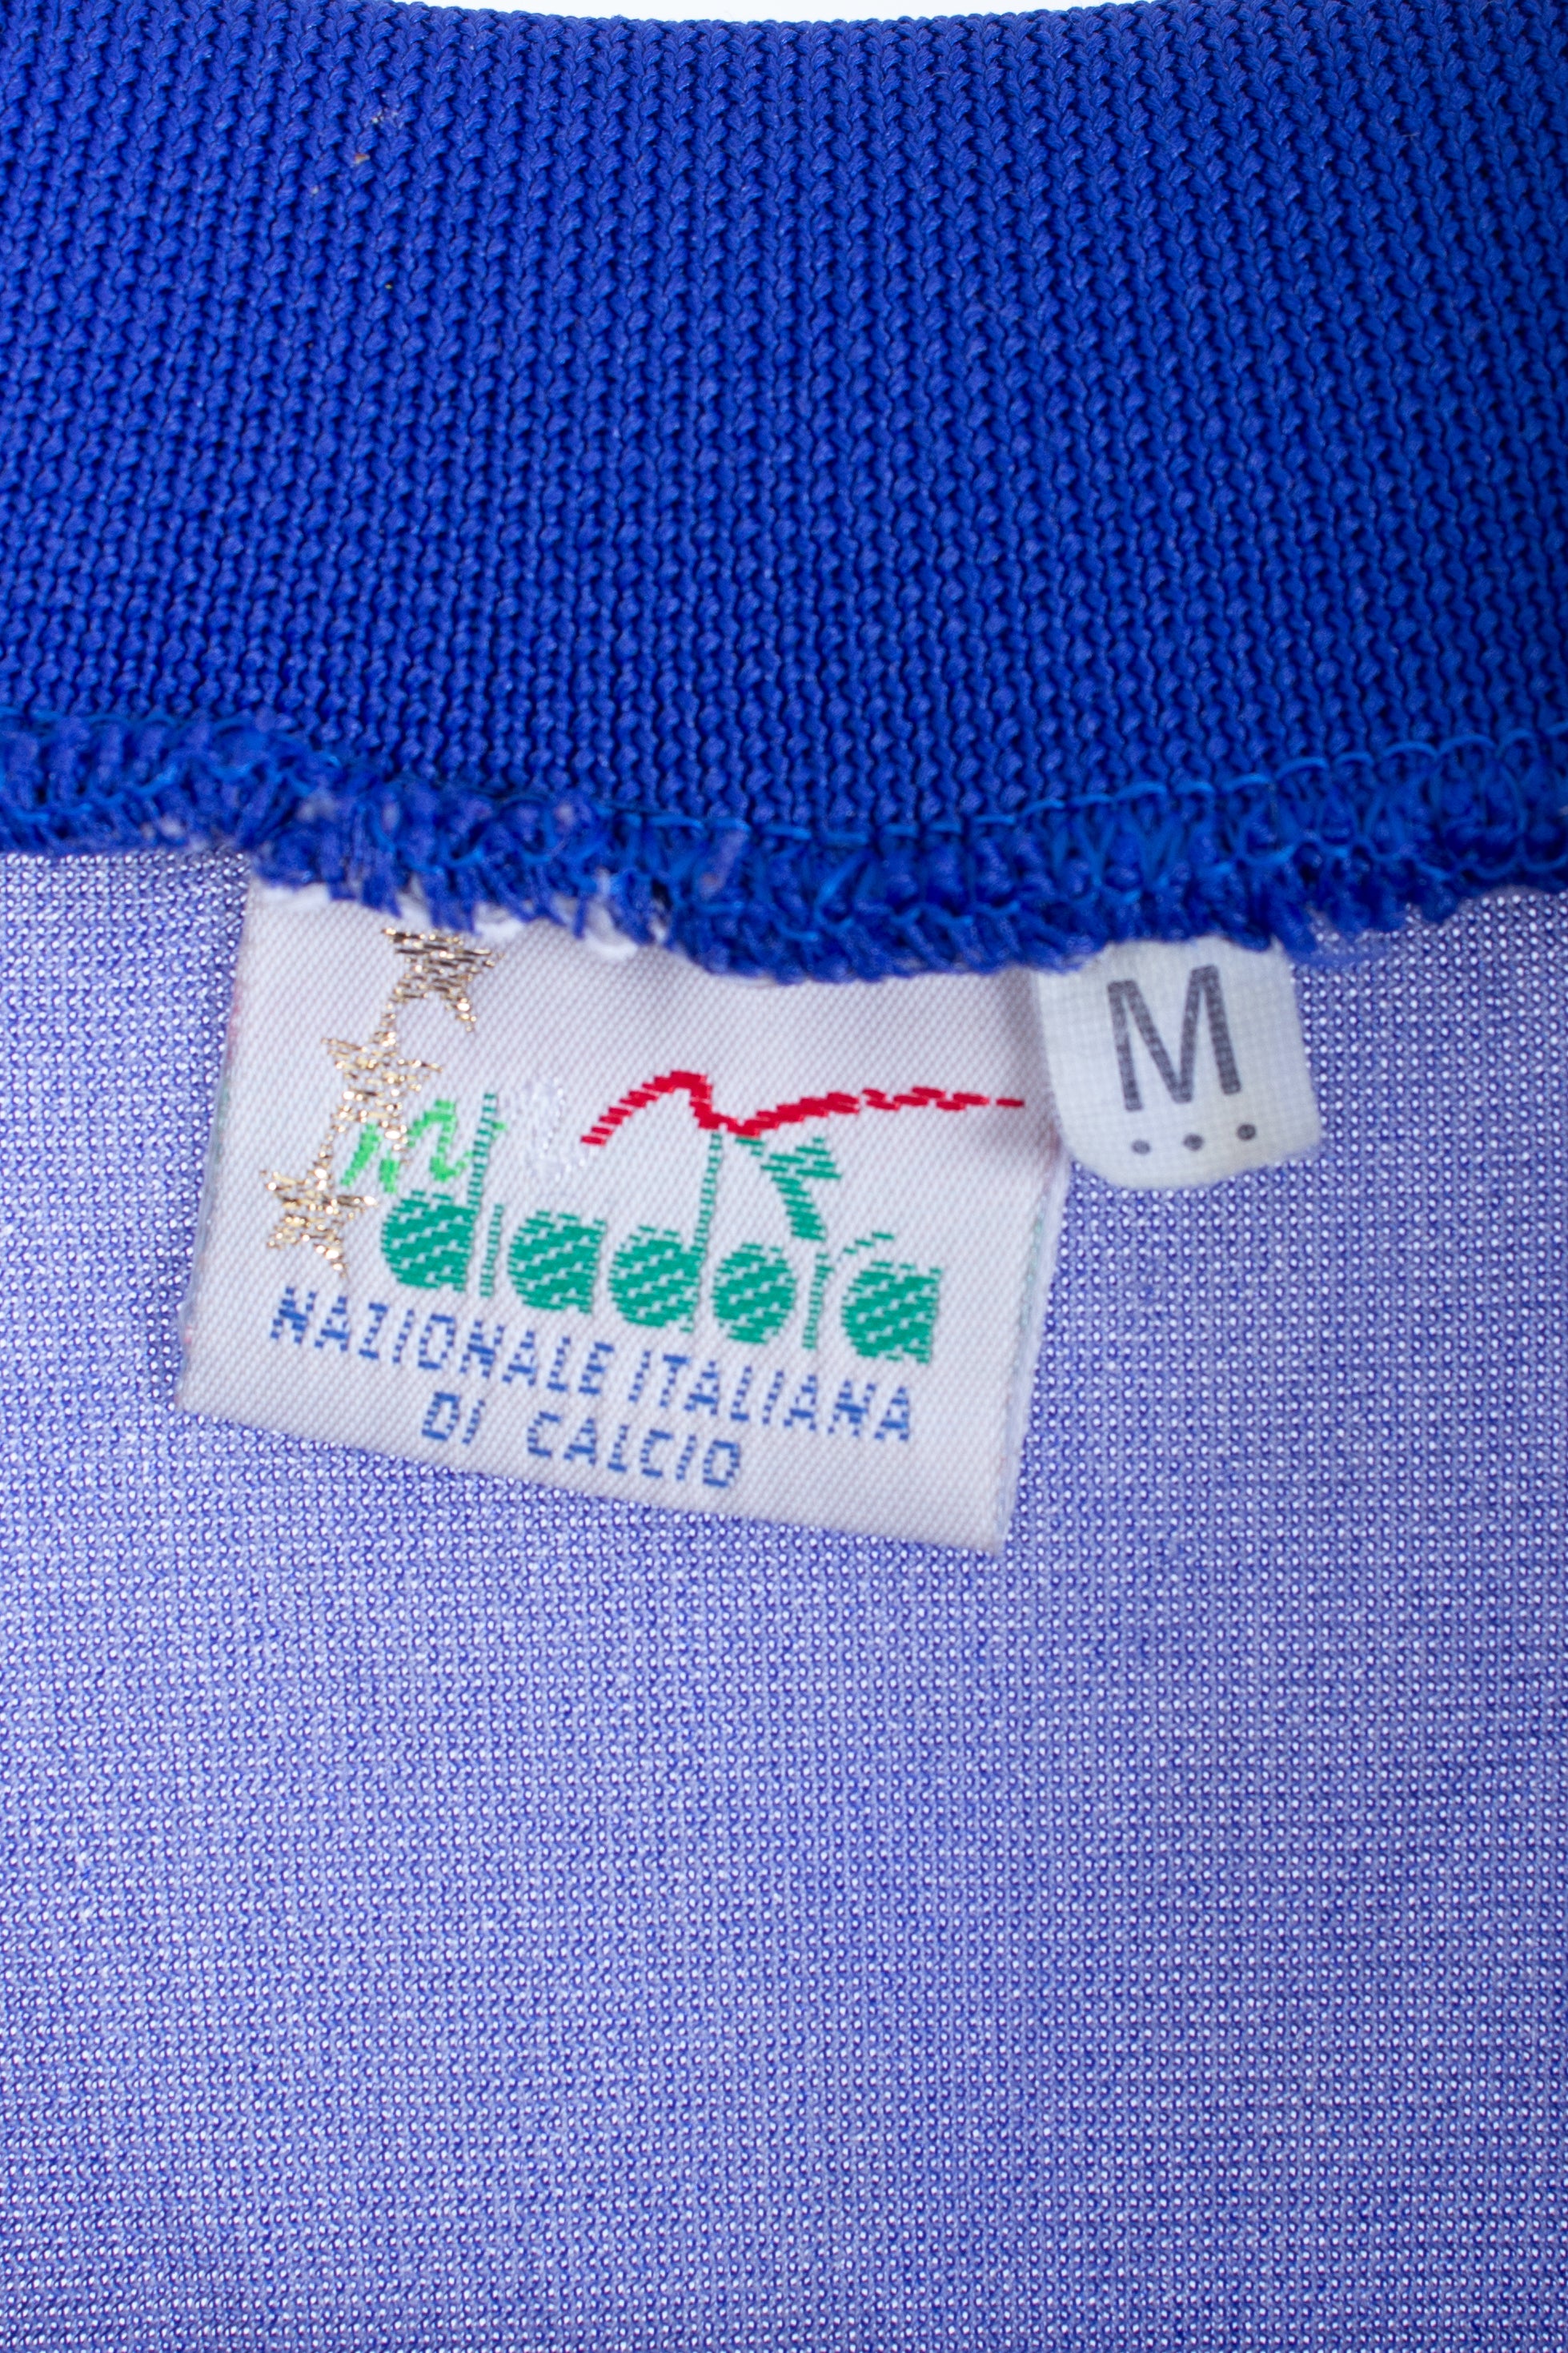 Italy 1986/90 Home Shirt (S/M)